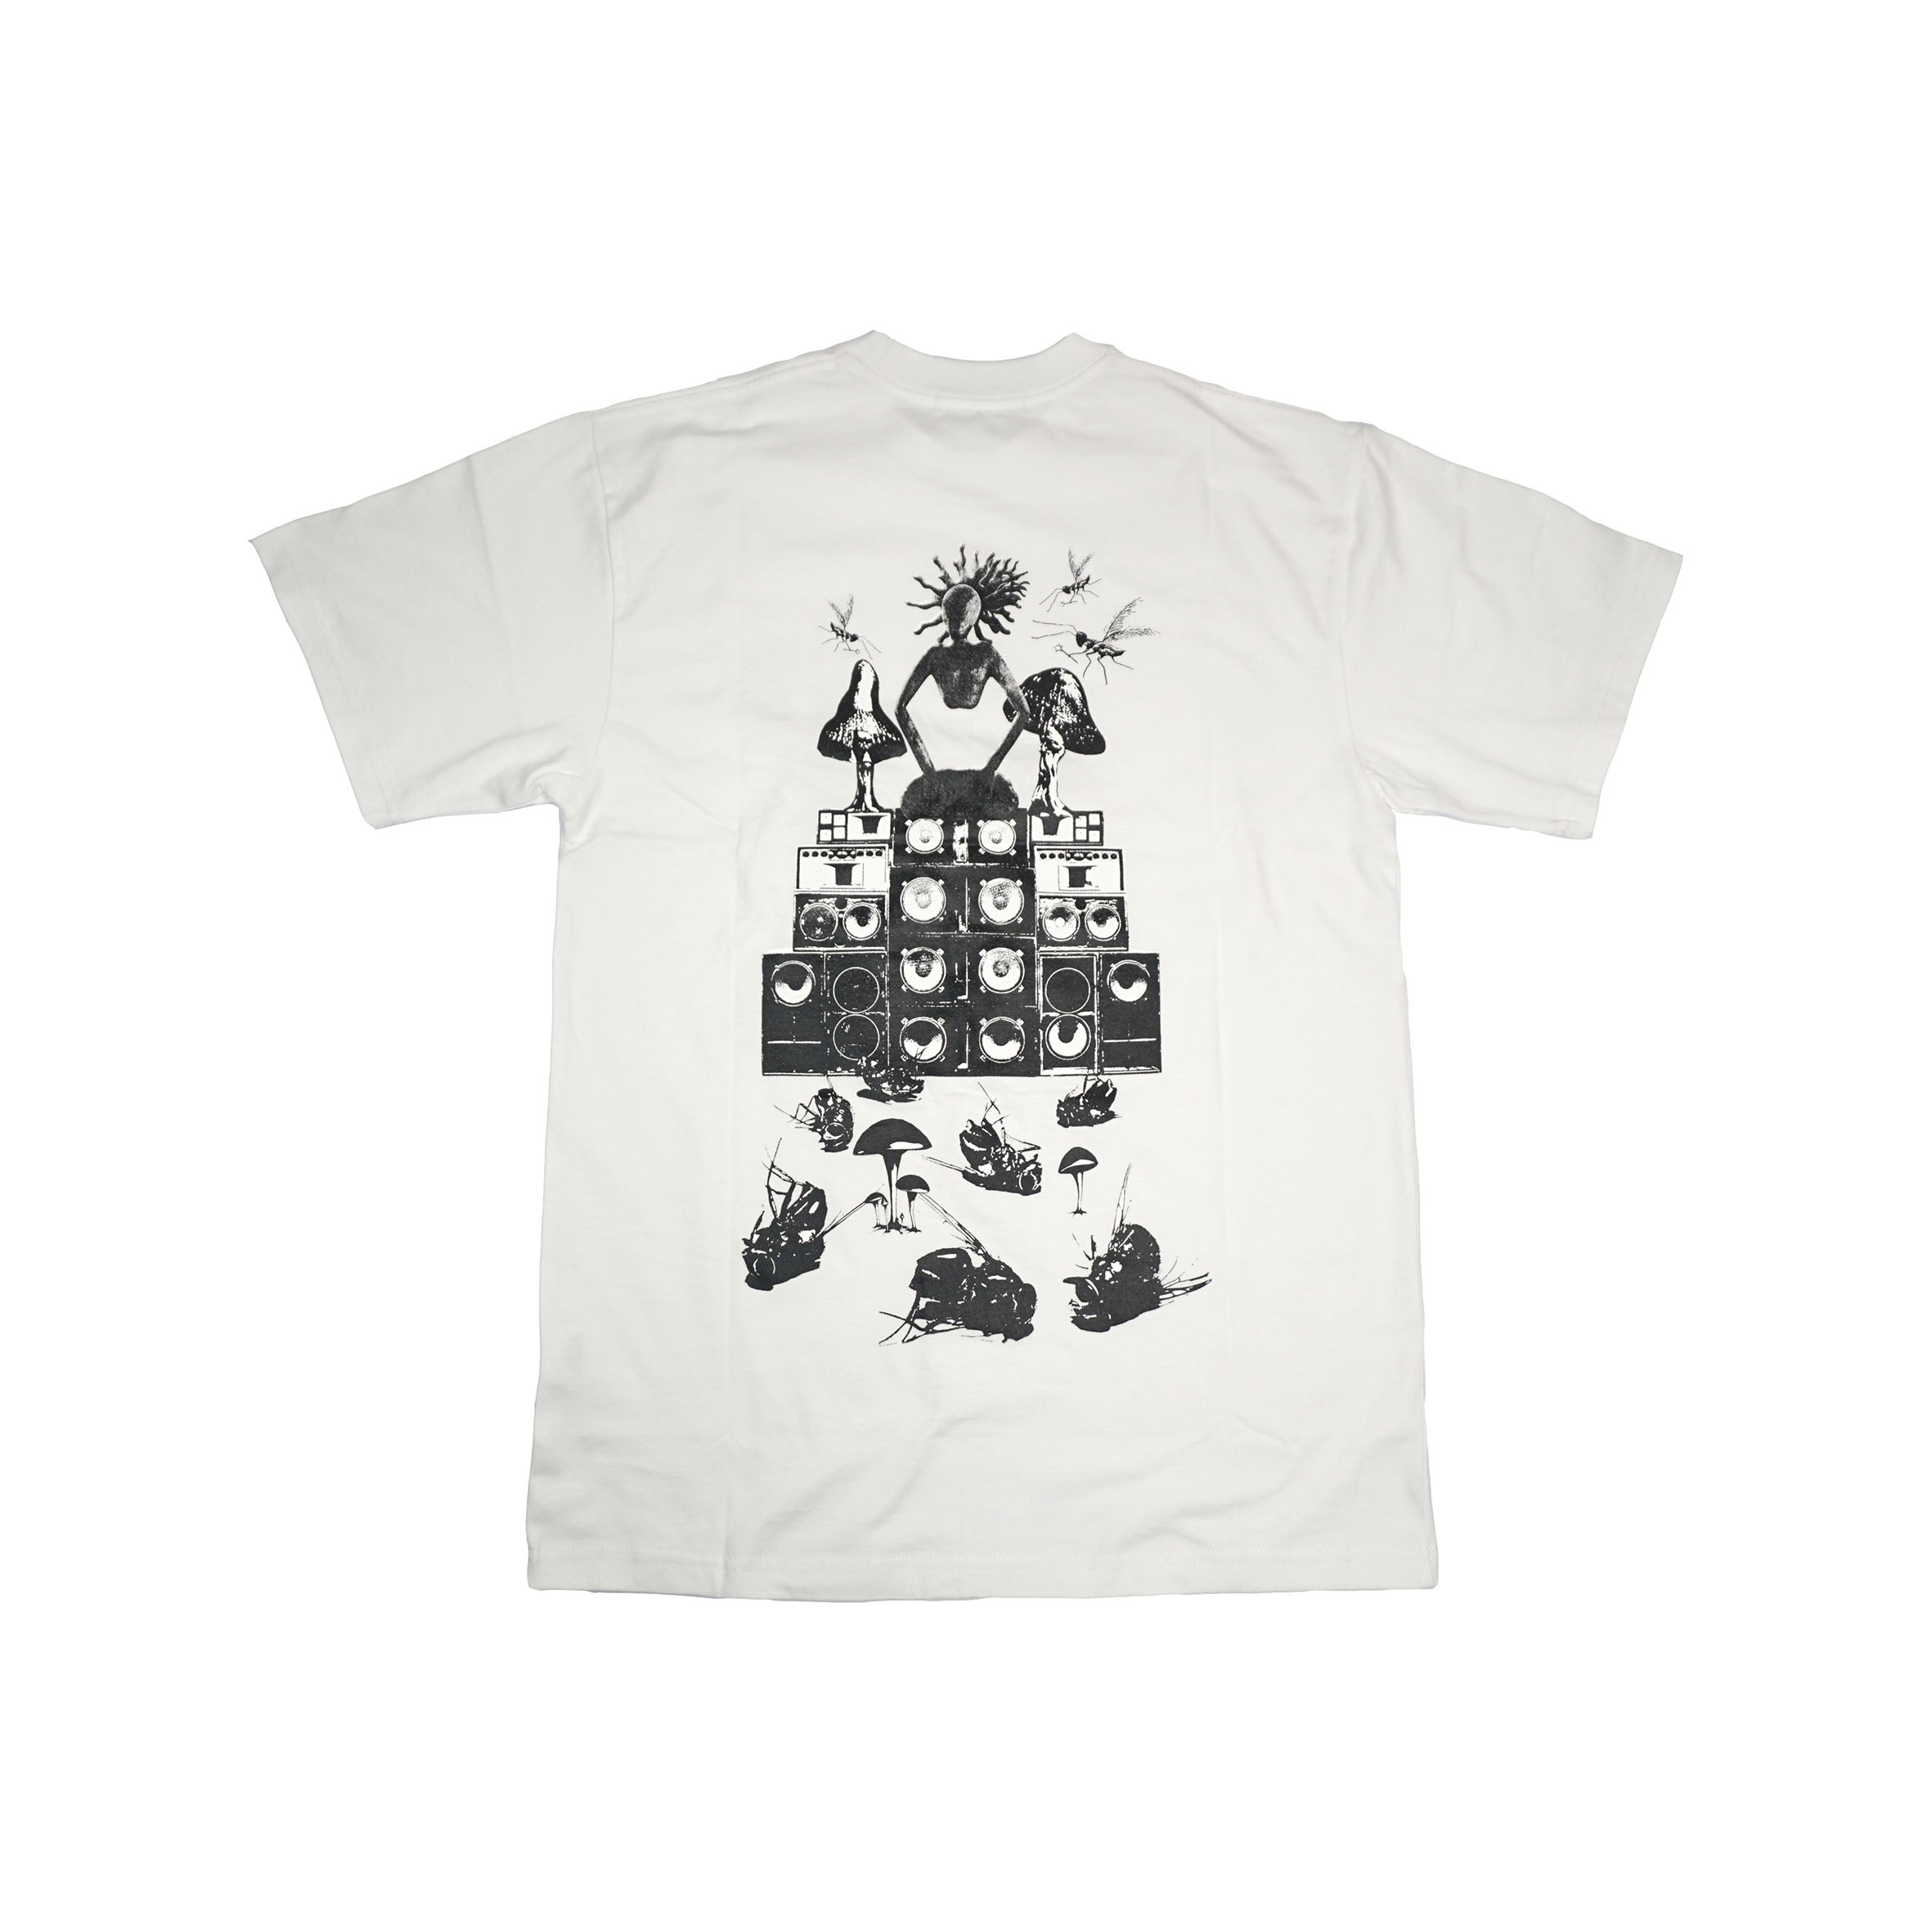 Product - UNKNOWN PARTY T-SHIRT (WHITE) | ALIVEWITHBRAIN